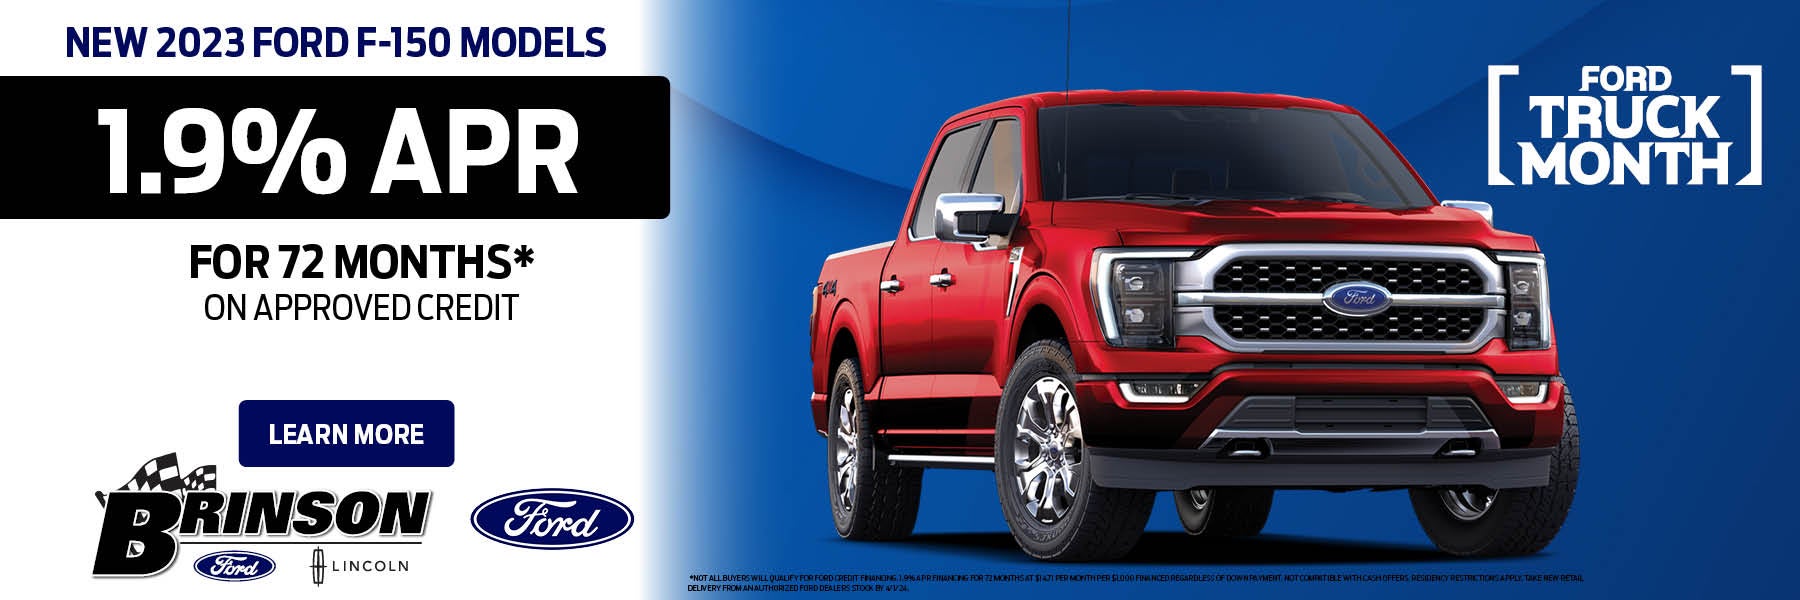 New 2023 Ford F-150 Models in Cirsicana, TX